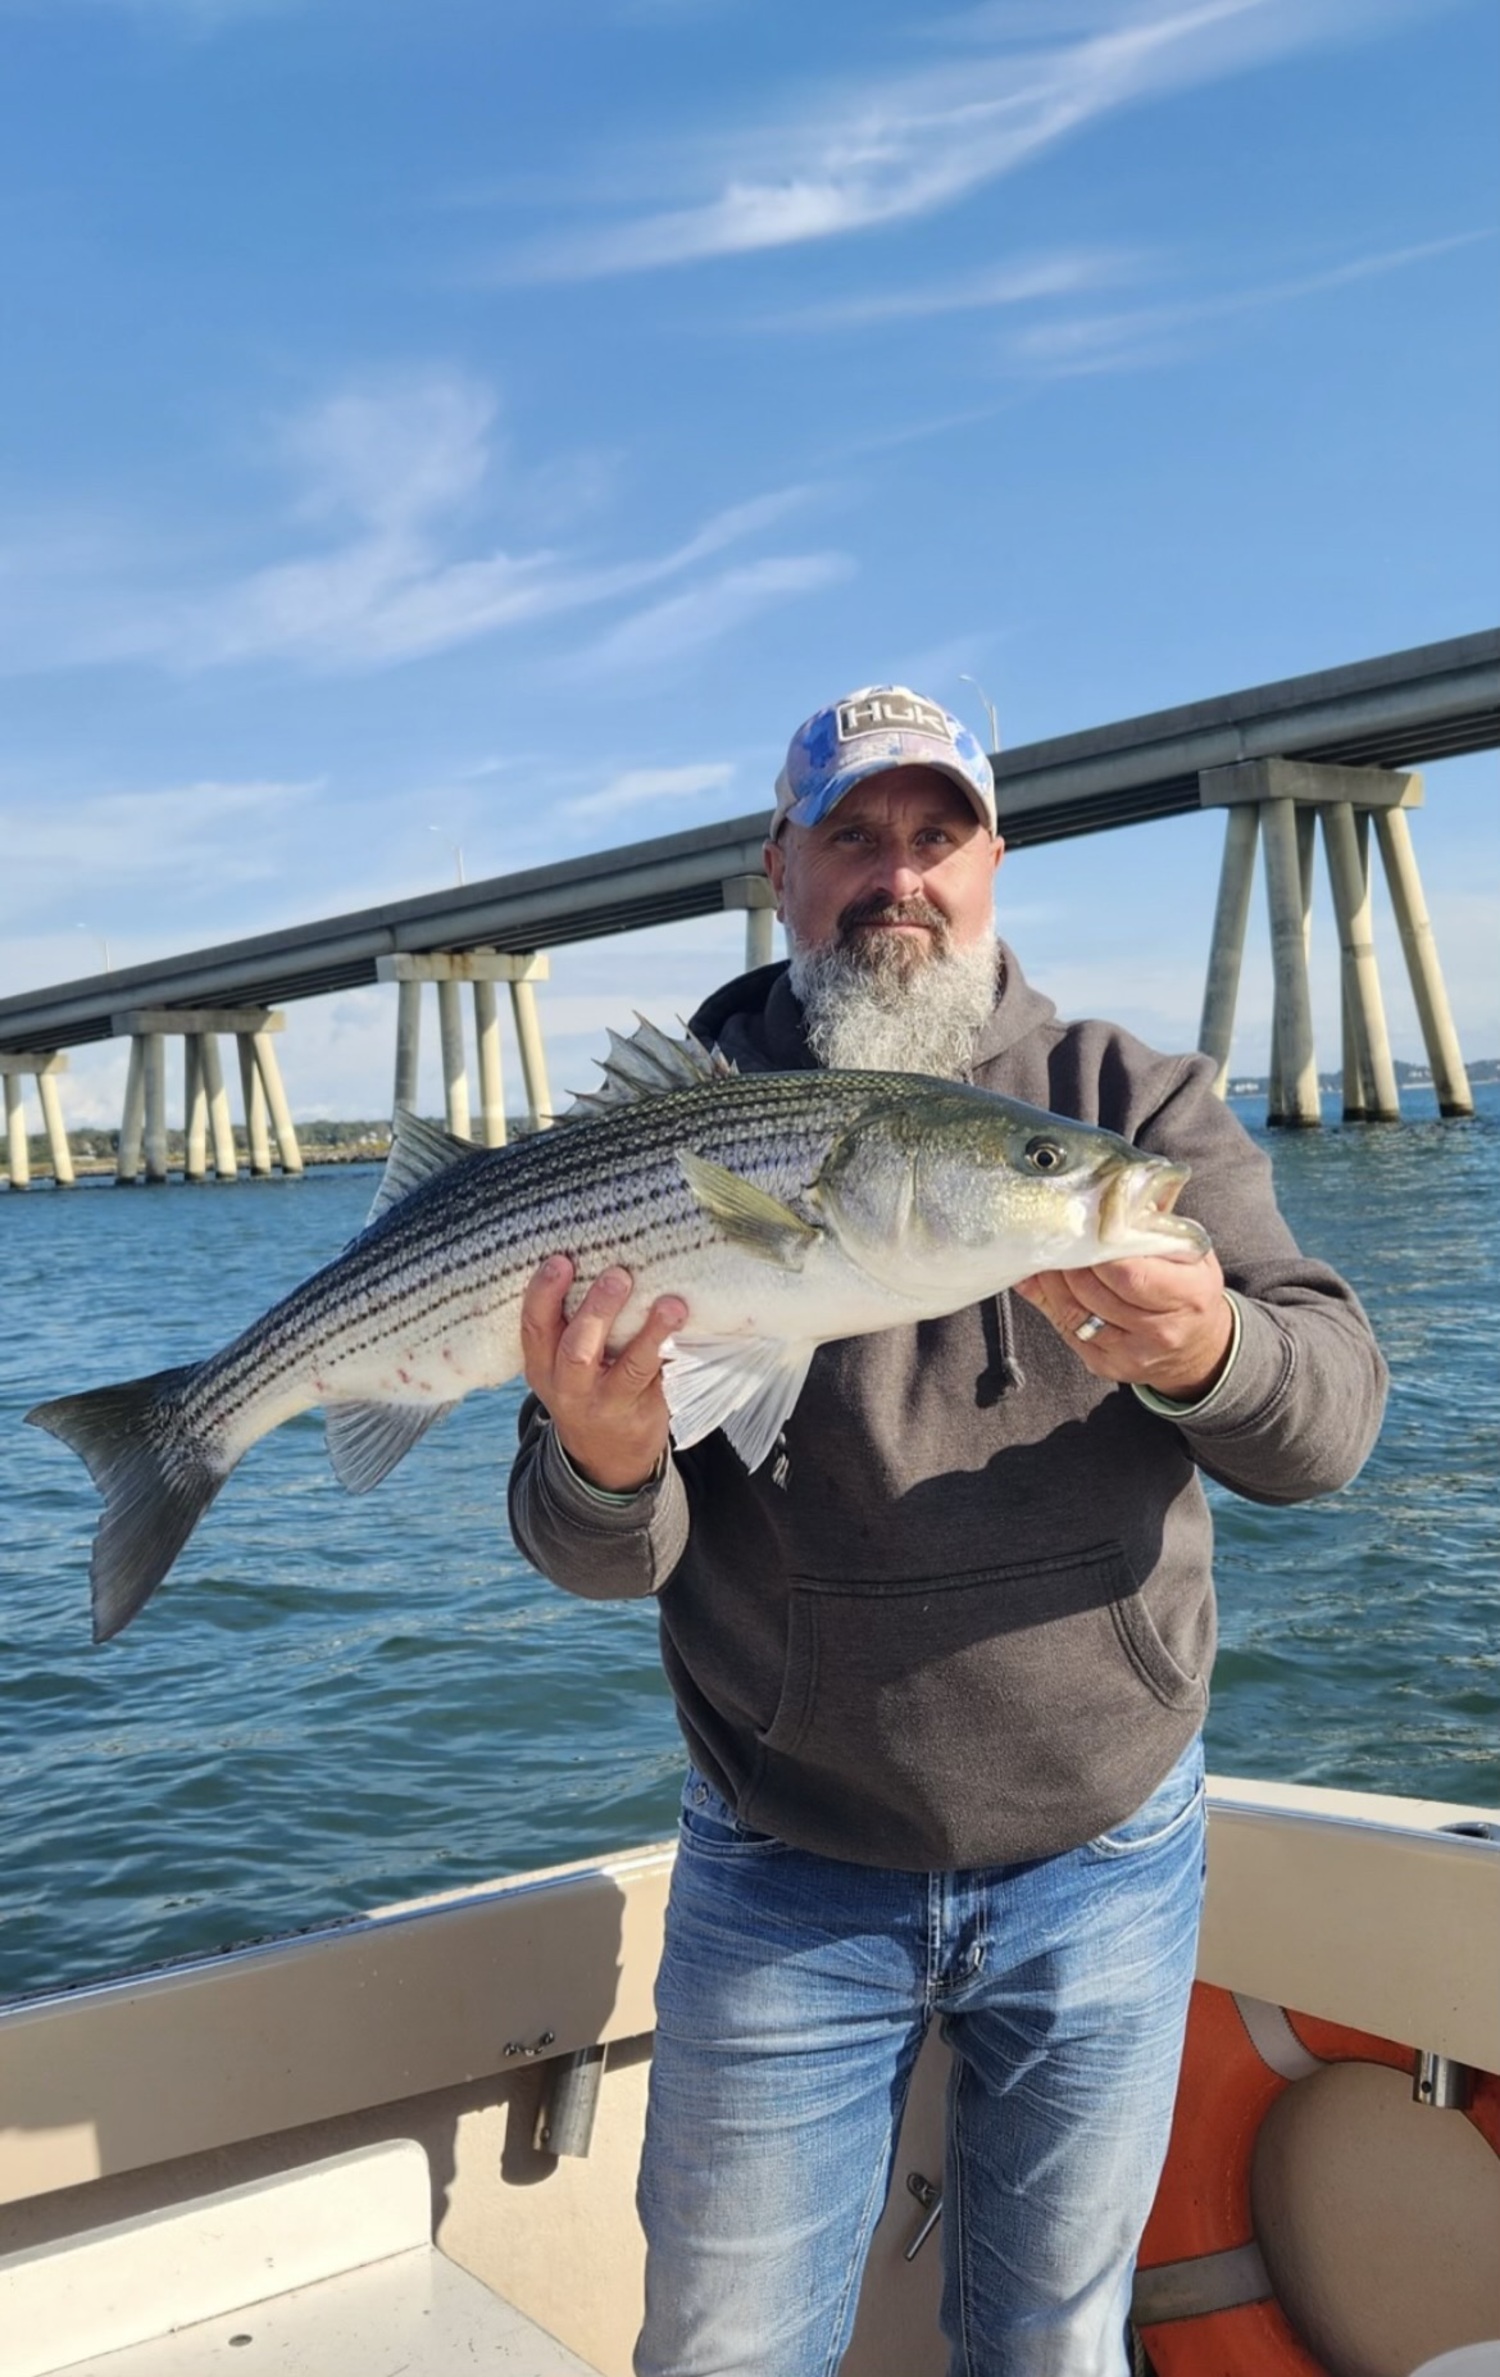 Danny Mosco with a nice fall-run striper from Shinnecock Bay aboard the charter boat Someday Came out of Hampton Bays. 
CAPT. BRAD RIES